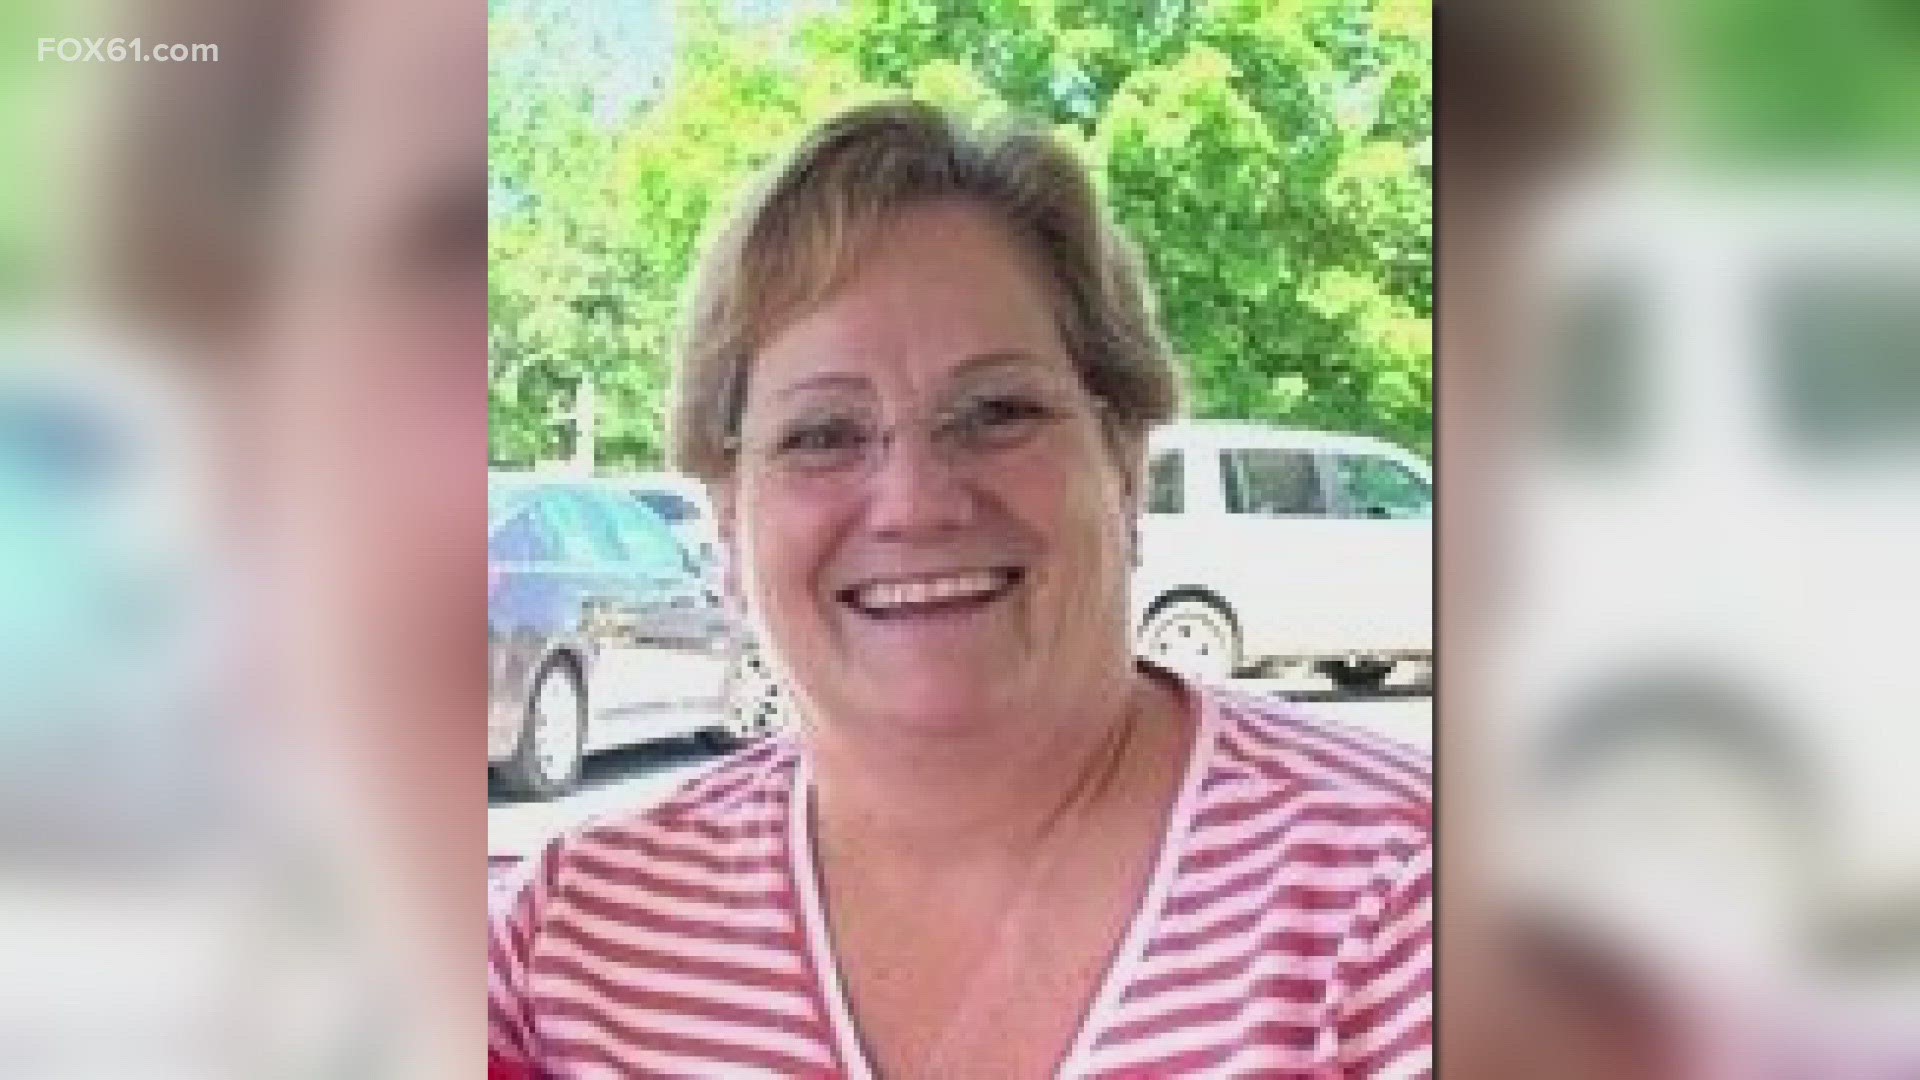 Joyce Grayson, 63, was found dead in a halfway house in Willimantic on Sunday.